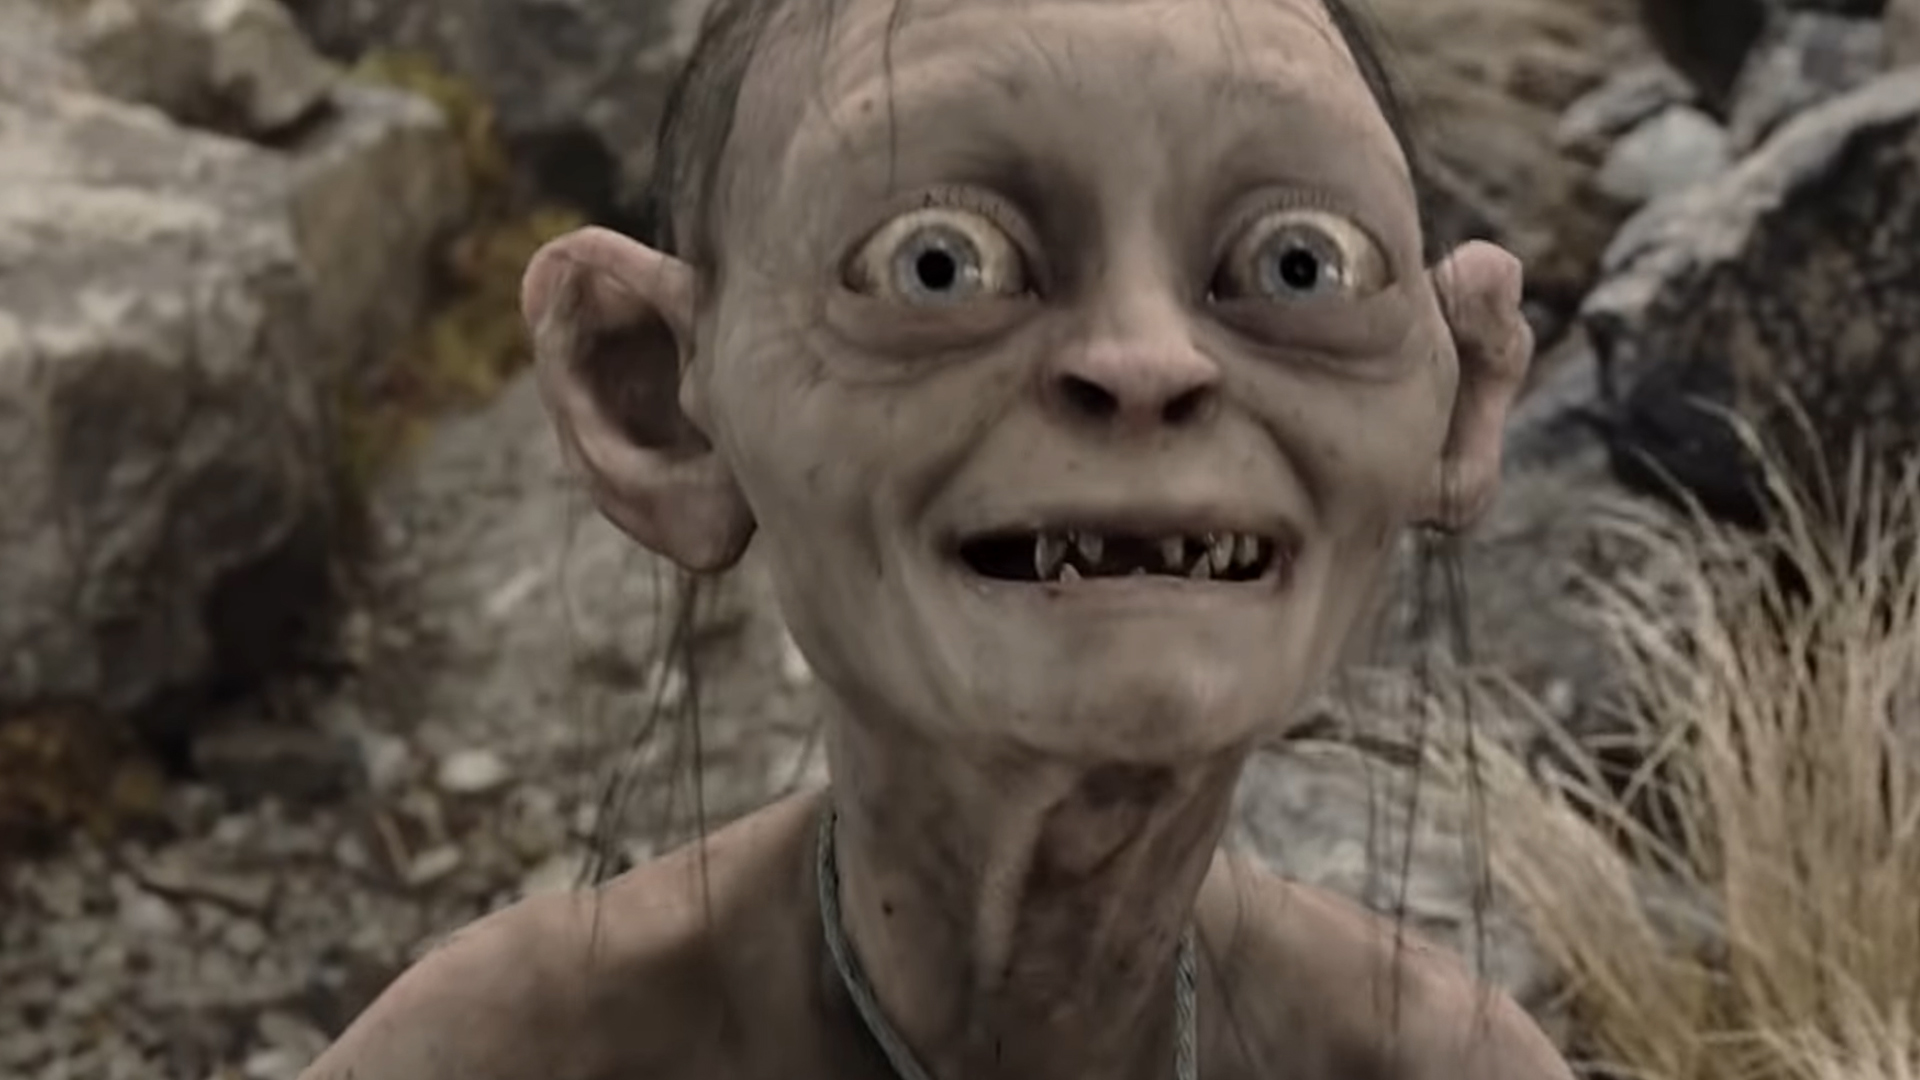 GOLLUM Official Trailer (2021) The Lord Of The Rings New Game HD 